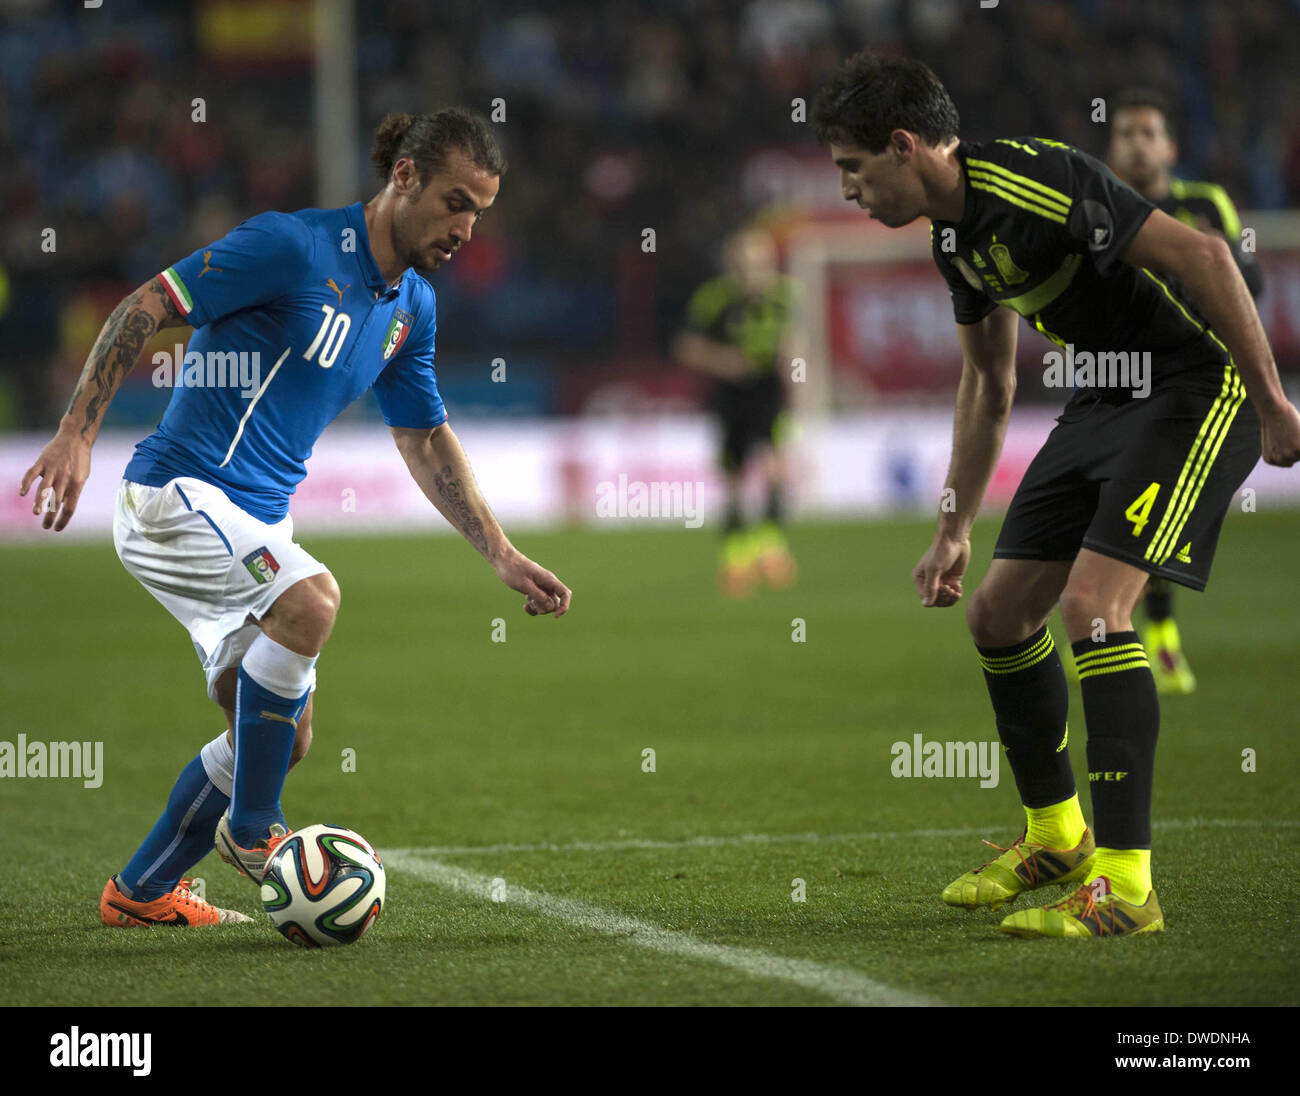 Madrid. 5th Mar, 2014. Pablo Osvaldo(L) of Italy vies the ball during an international friendly football match between Italy and Spain at Madrid, Spain on March 5, 2014. Italy lost 0-1. Credit:  Xie Haining/Xinhua/Alamy Live News Stock Photo